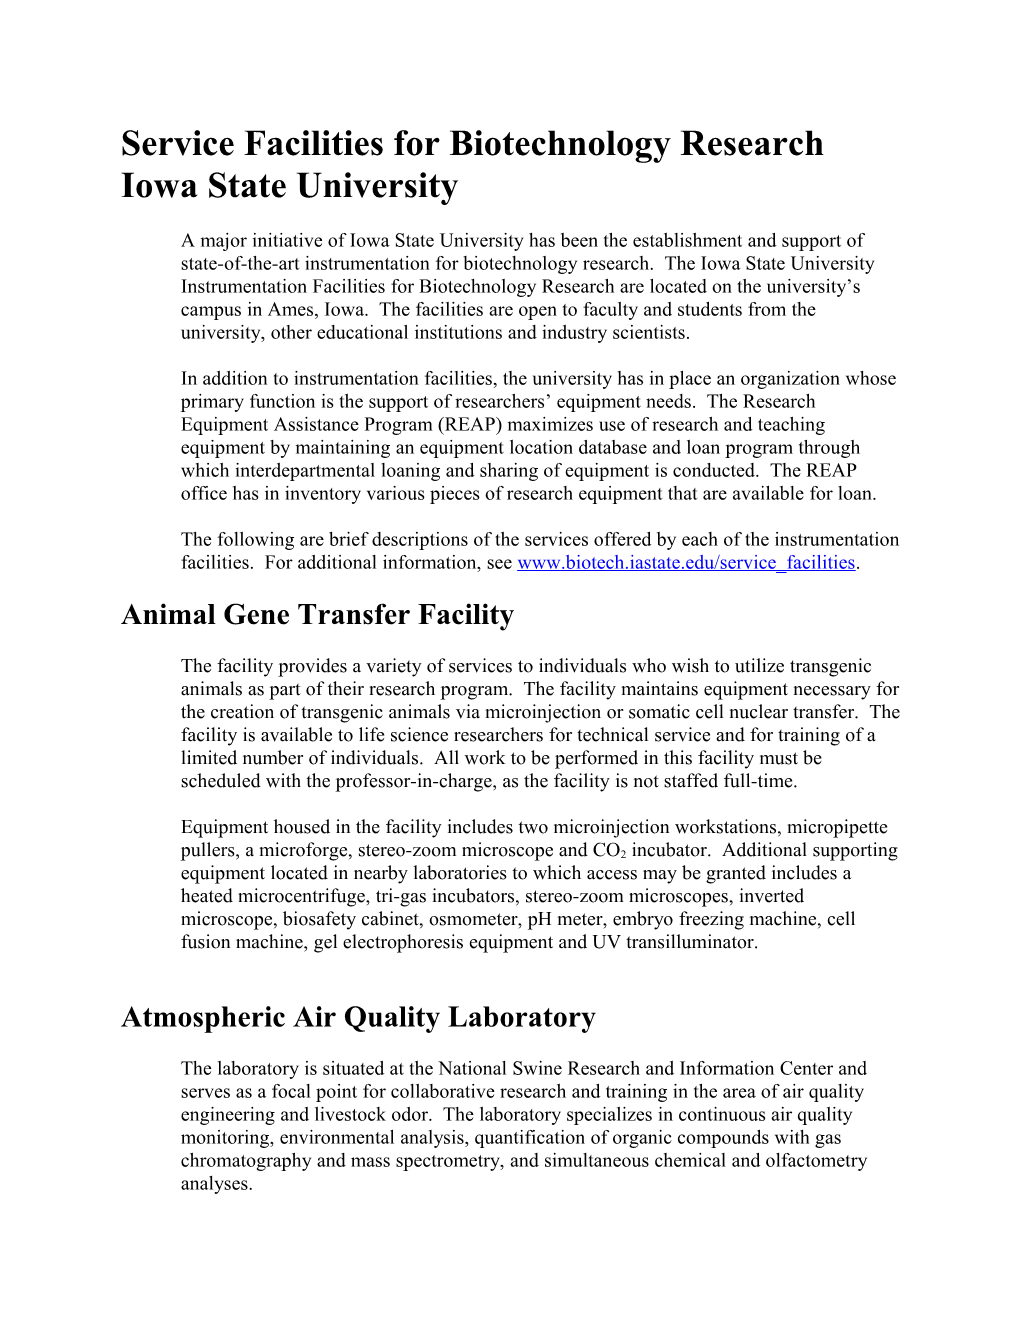 Iowa State University Service Facilities for Biotechnology Research